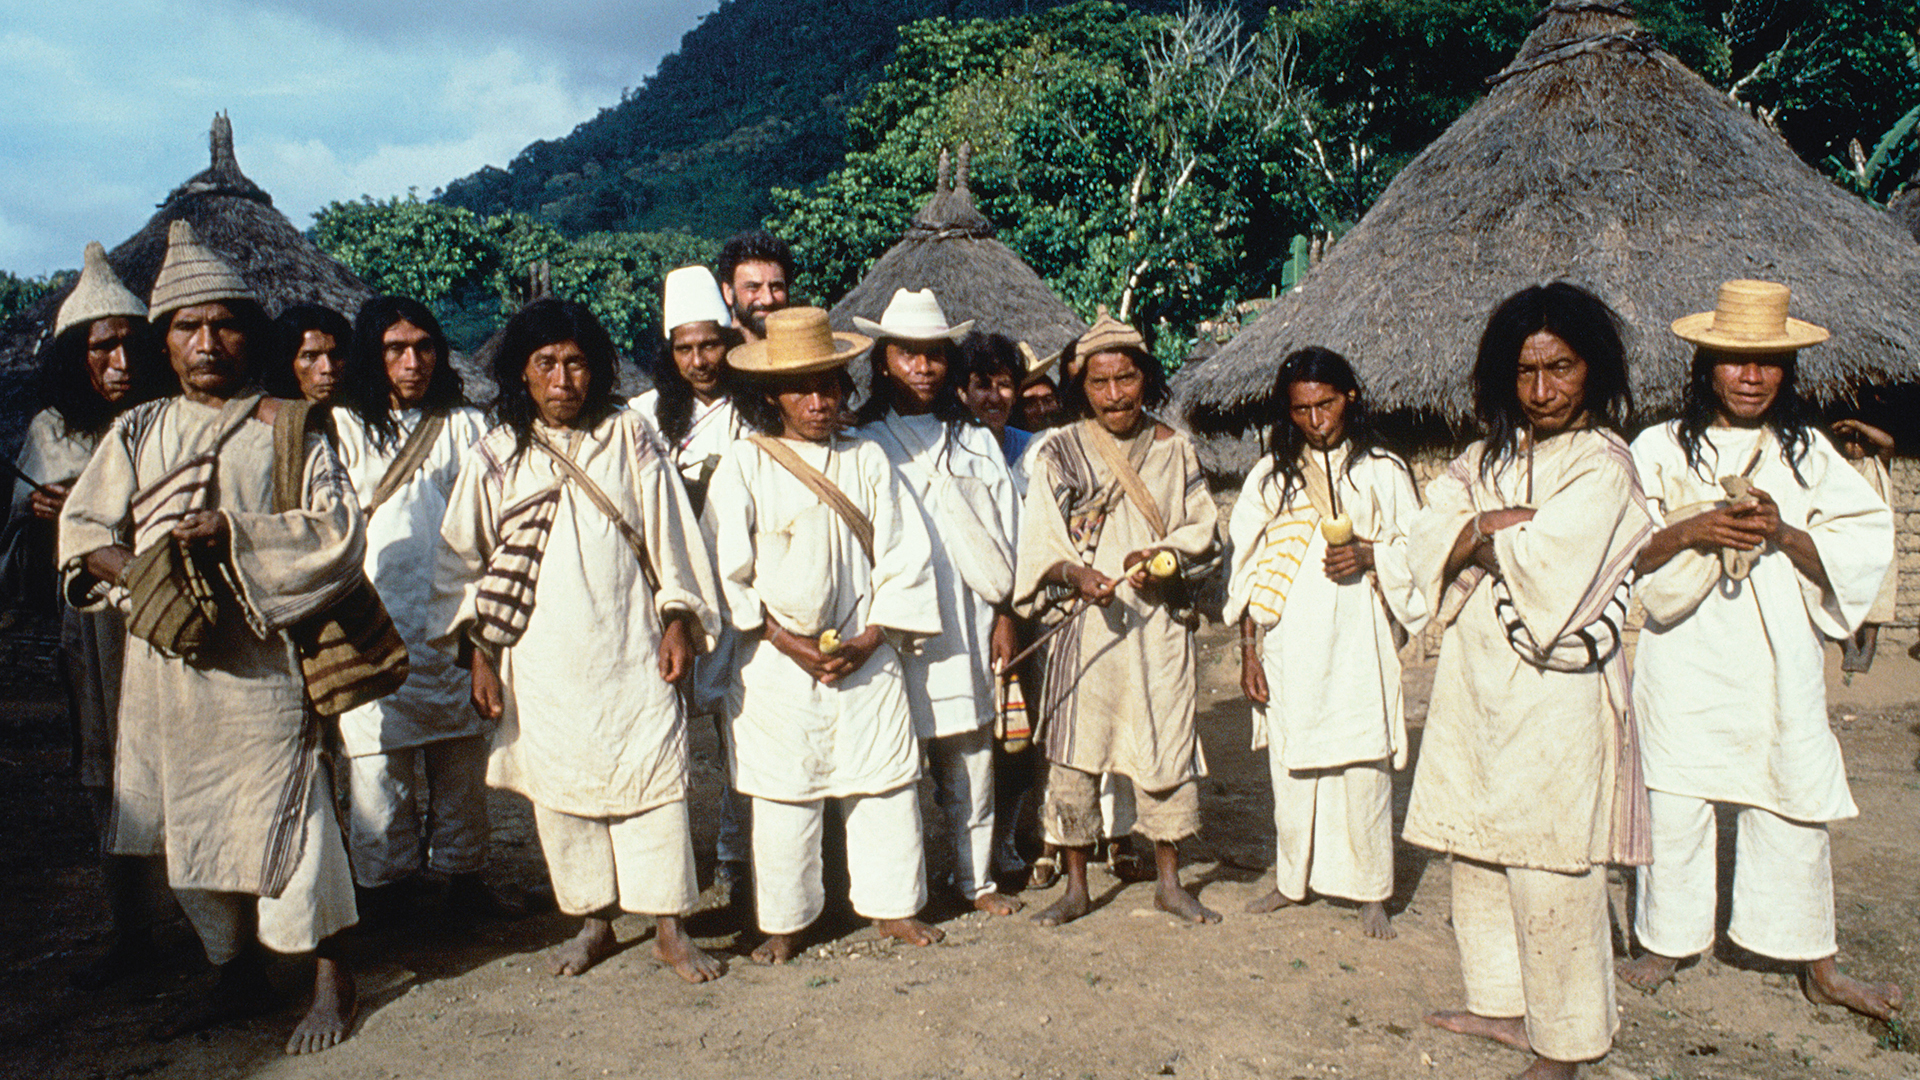 Filmmaker Alan Ereira with the Kogi tribe of Colombia